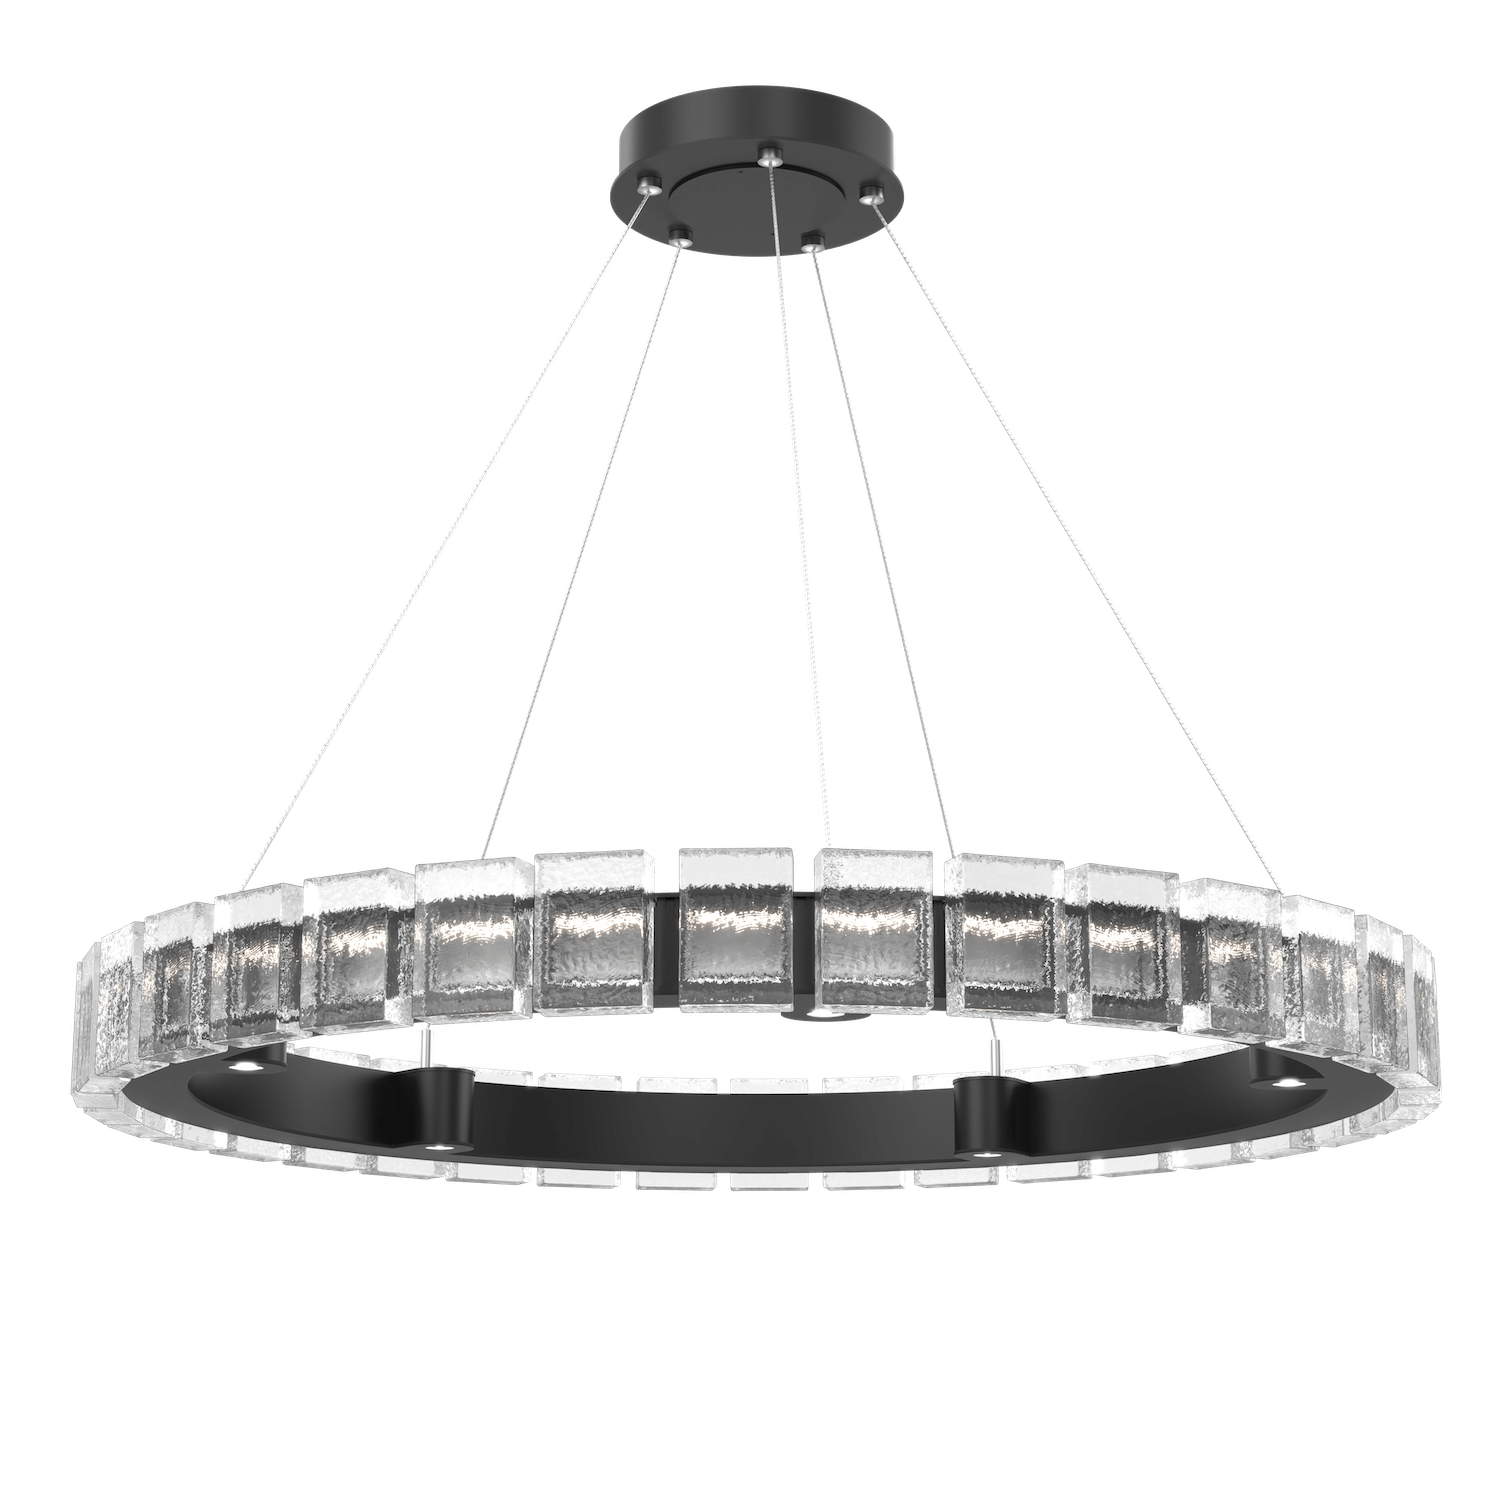 CHB0087-38-MB-TP-Hammerton-Studio-Tessera-38-inch-ring-chandelier-with-matte-black-finish-and-clear-pave-cast-glass-shade-and-LED-lamping